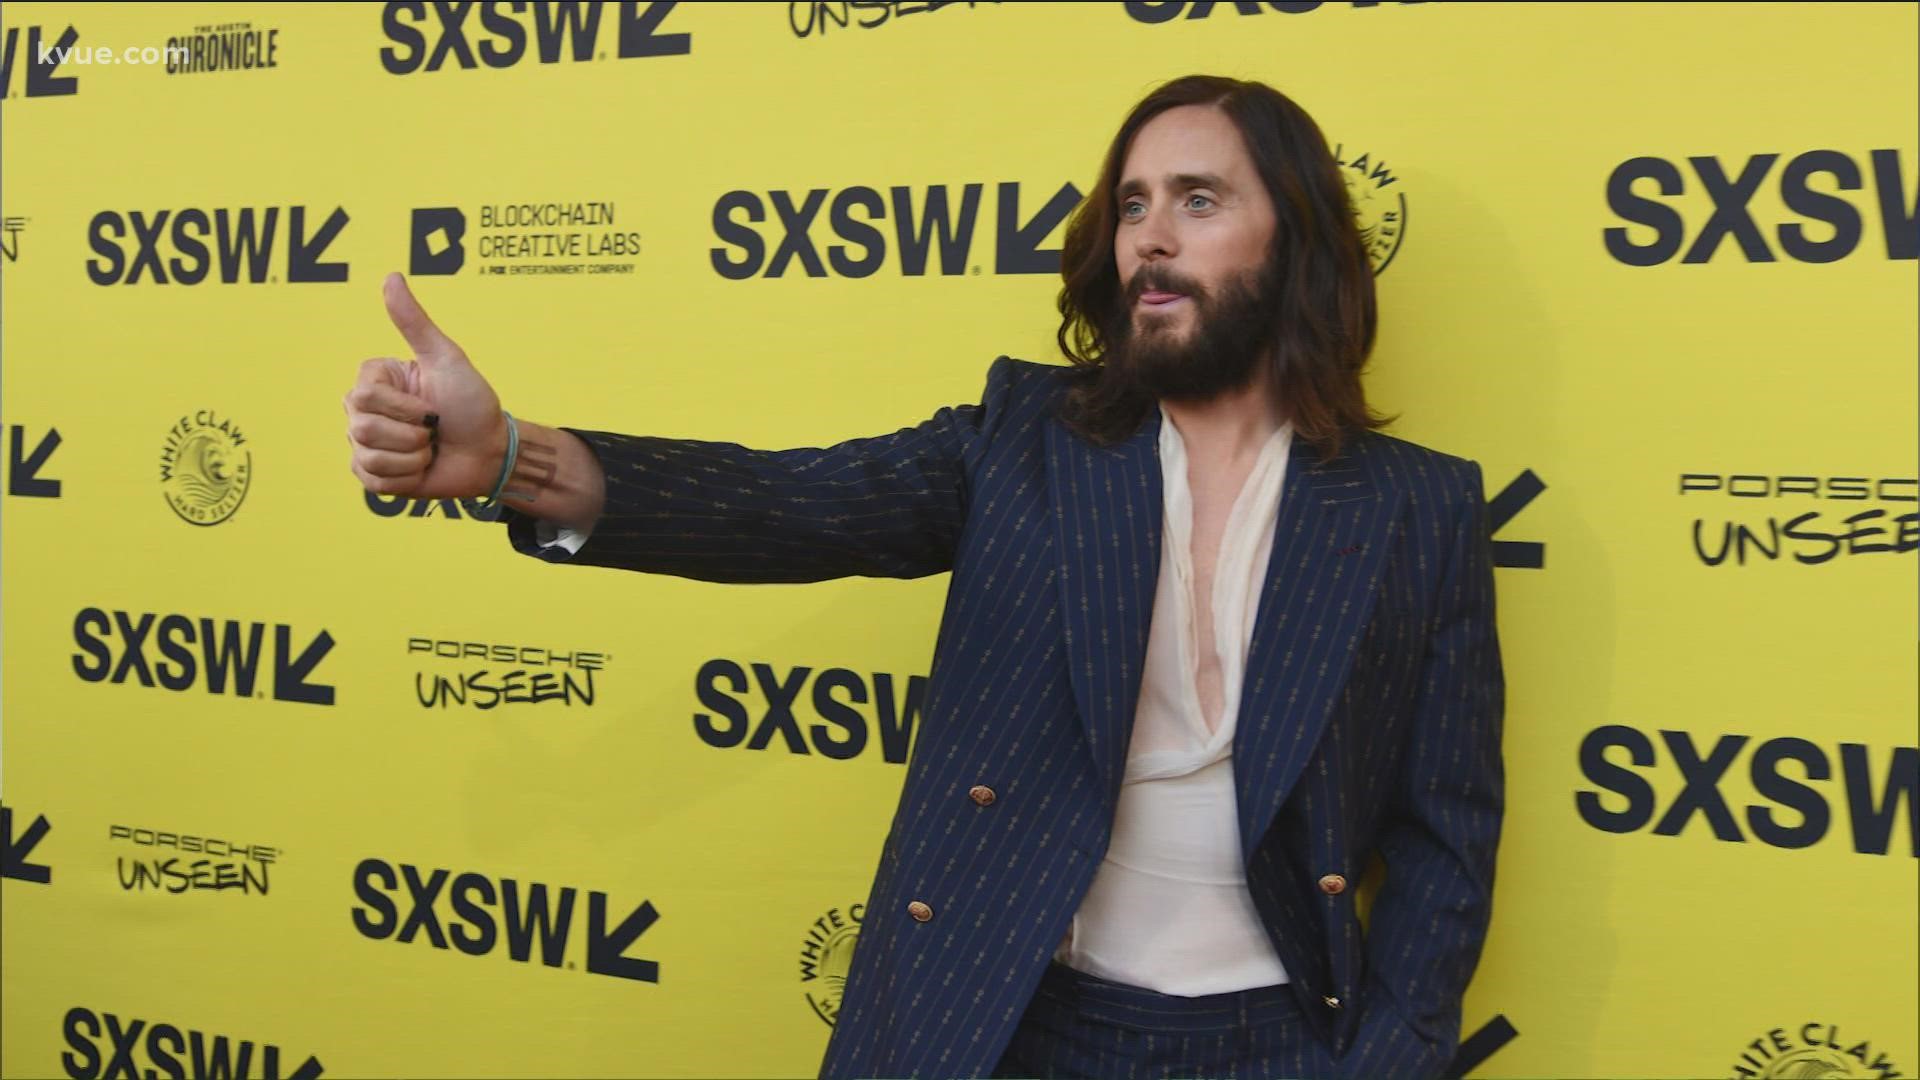 KVUE's Brittany Flowers spoke with Jared Leto, Sandra Bullock, Daniel Radcliffe and many others on the SXSW red carpet.